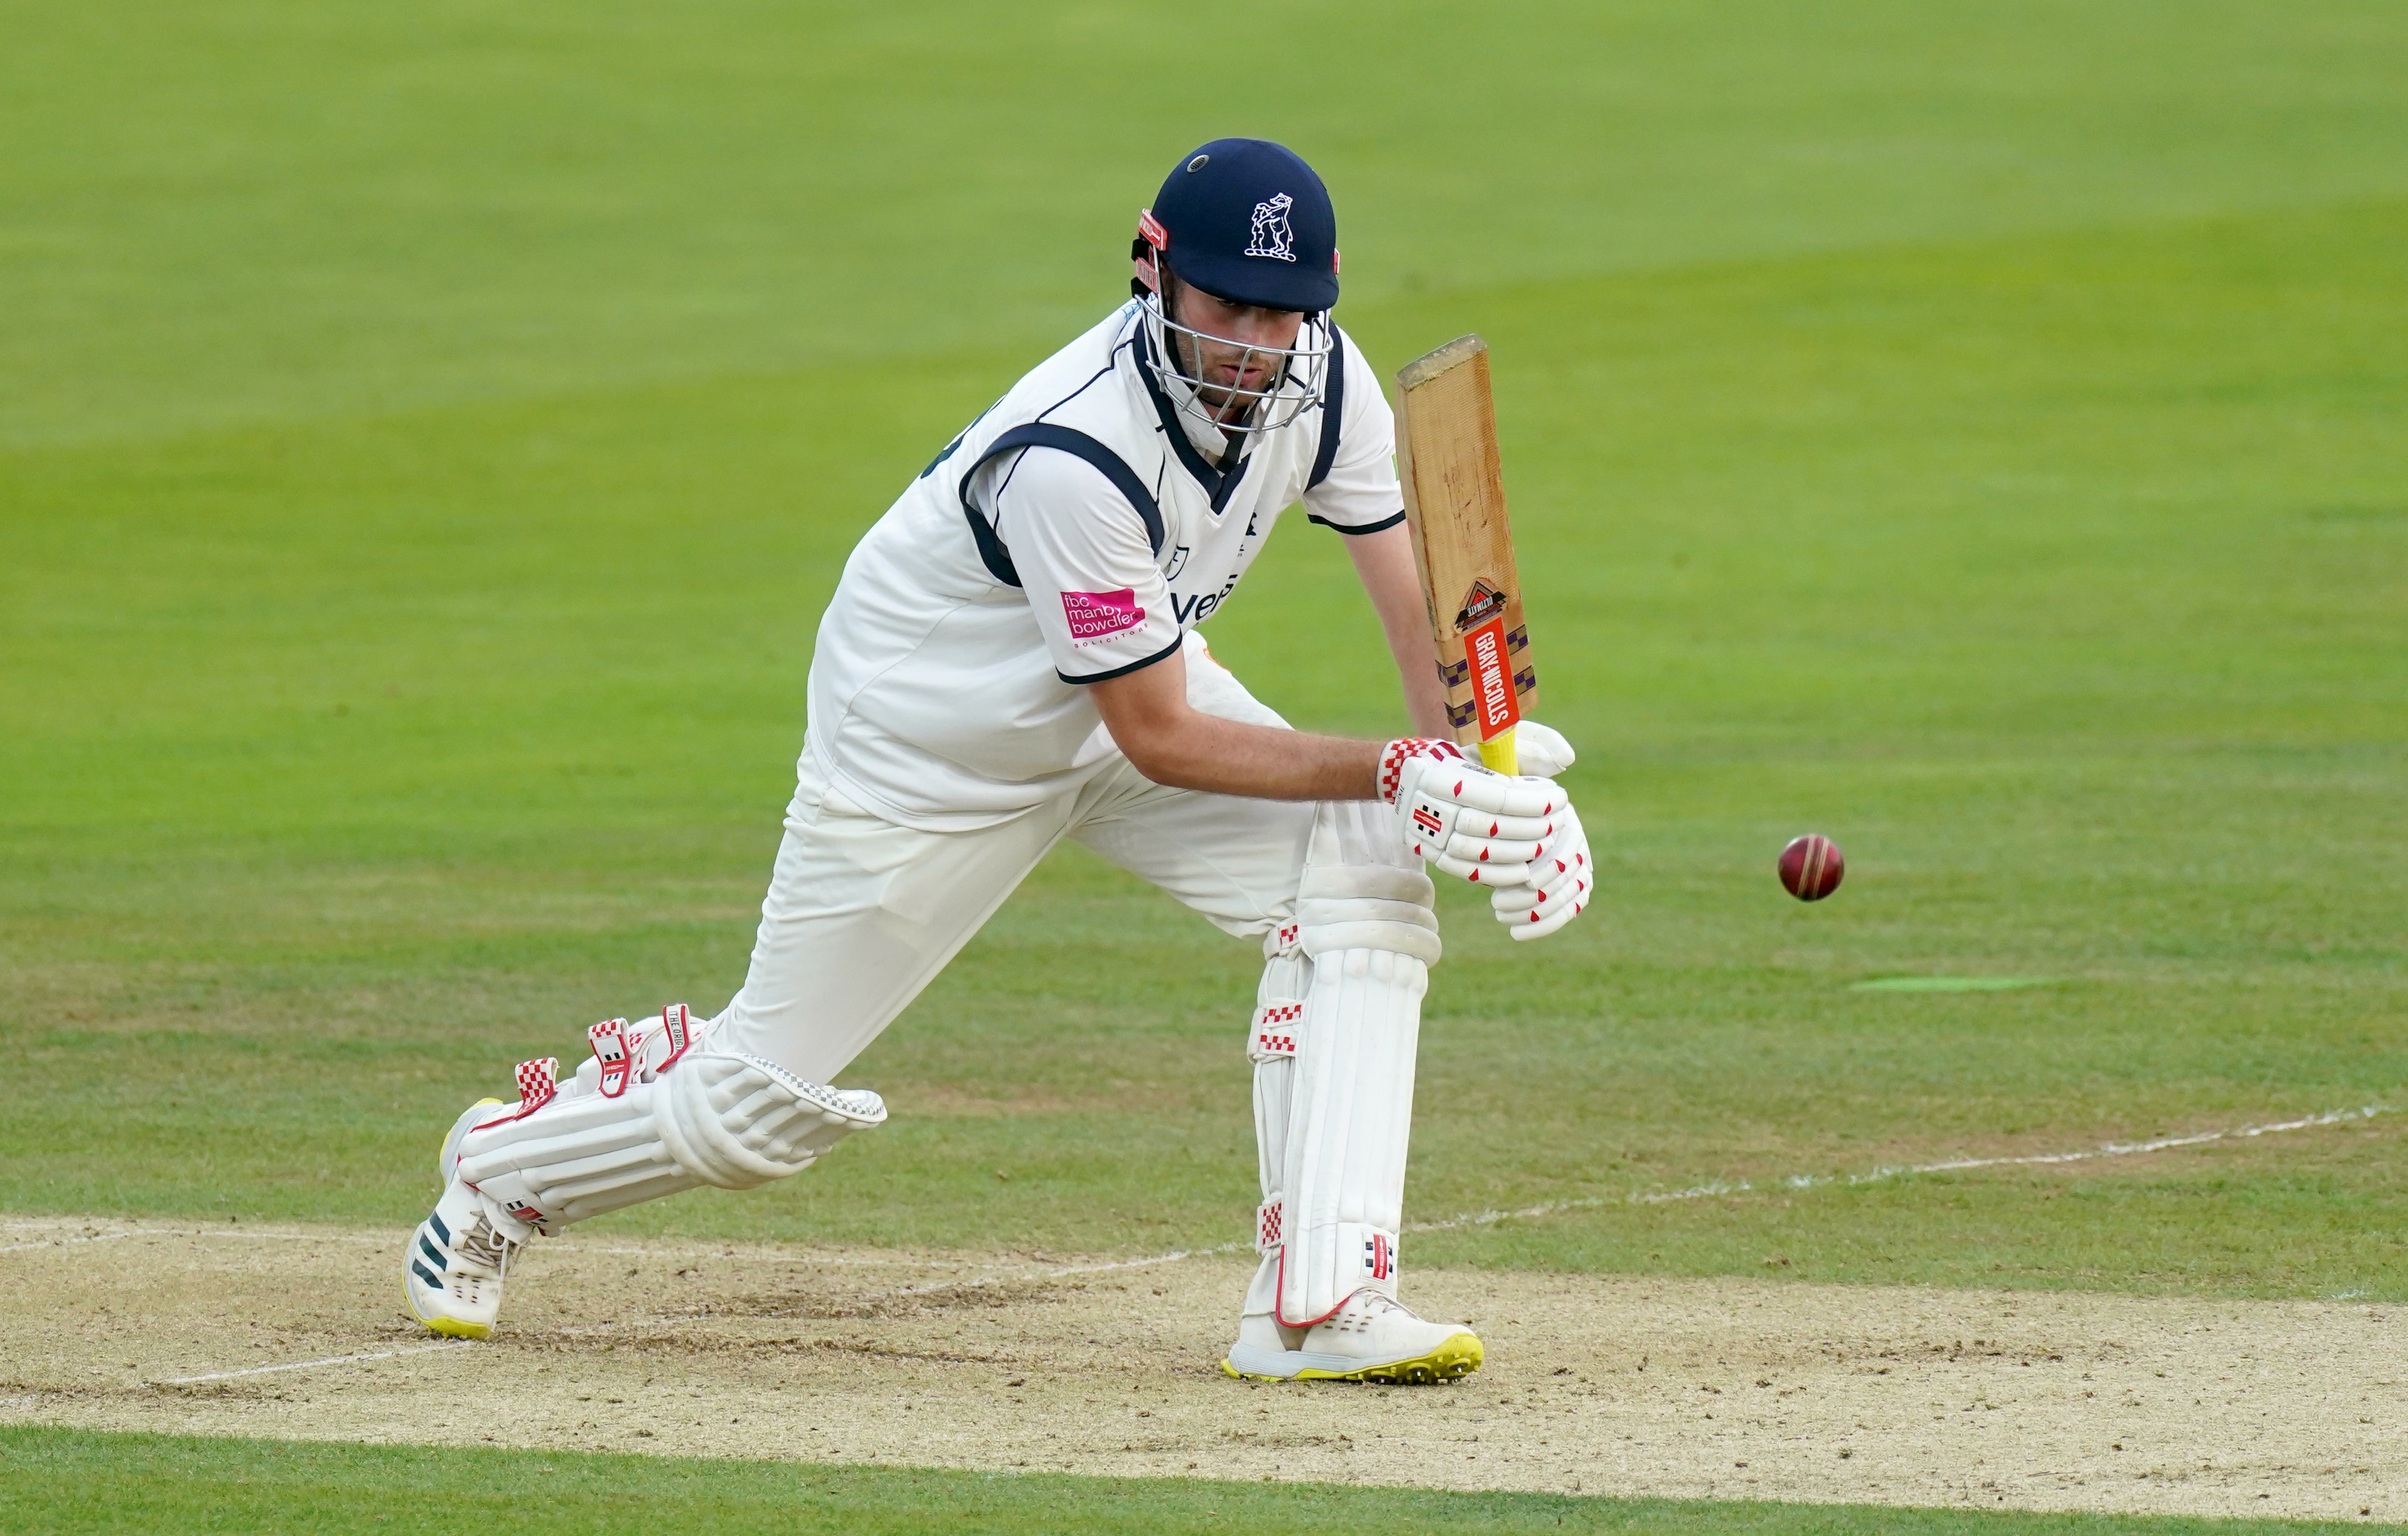 Dom Sibley top scored for Warwickshire at the Kia Oval (Adam Davy/PA)